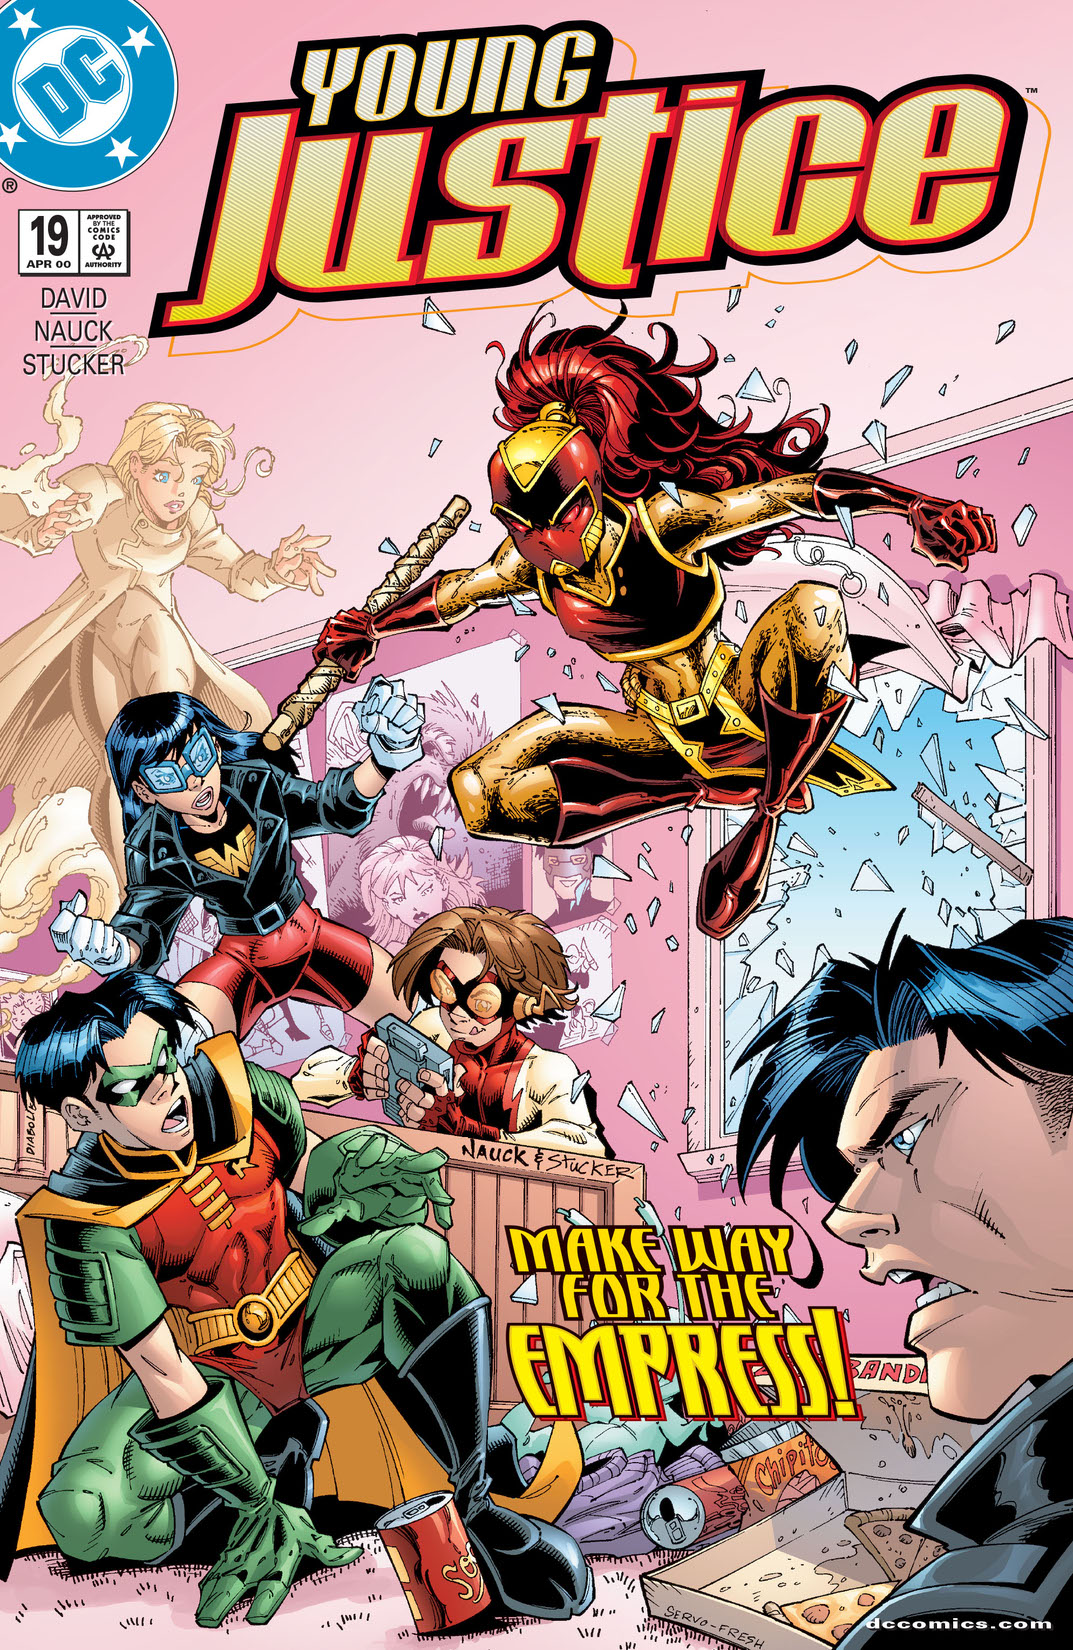 Young Justice (1998-) #19 preview images